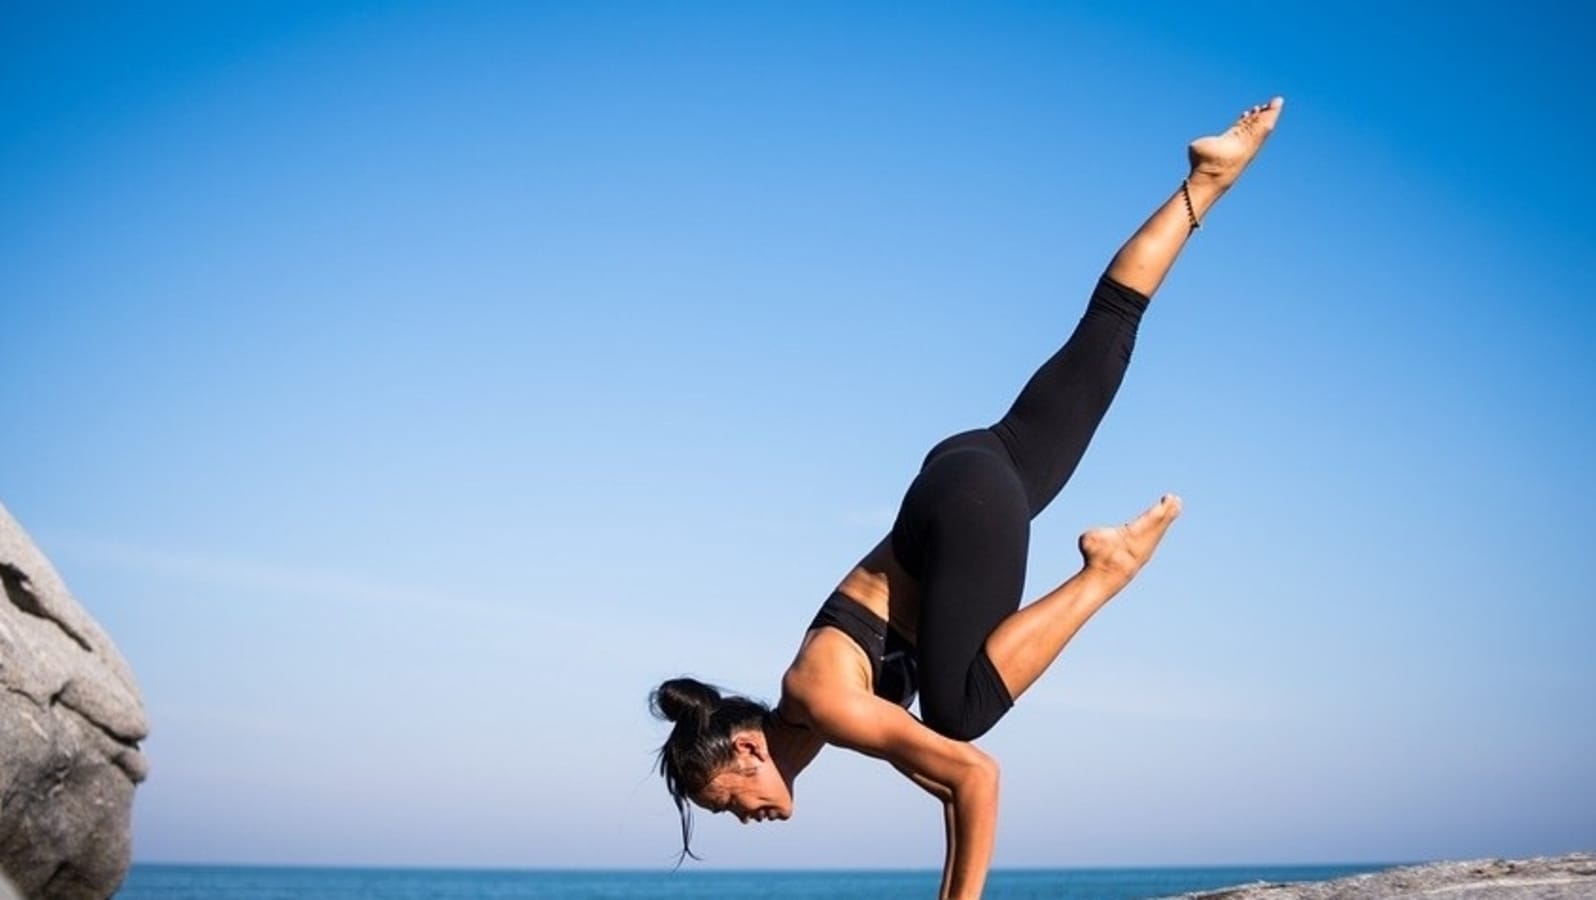 Yoga expert offers tips for beginners to prevent Yoga injuries